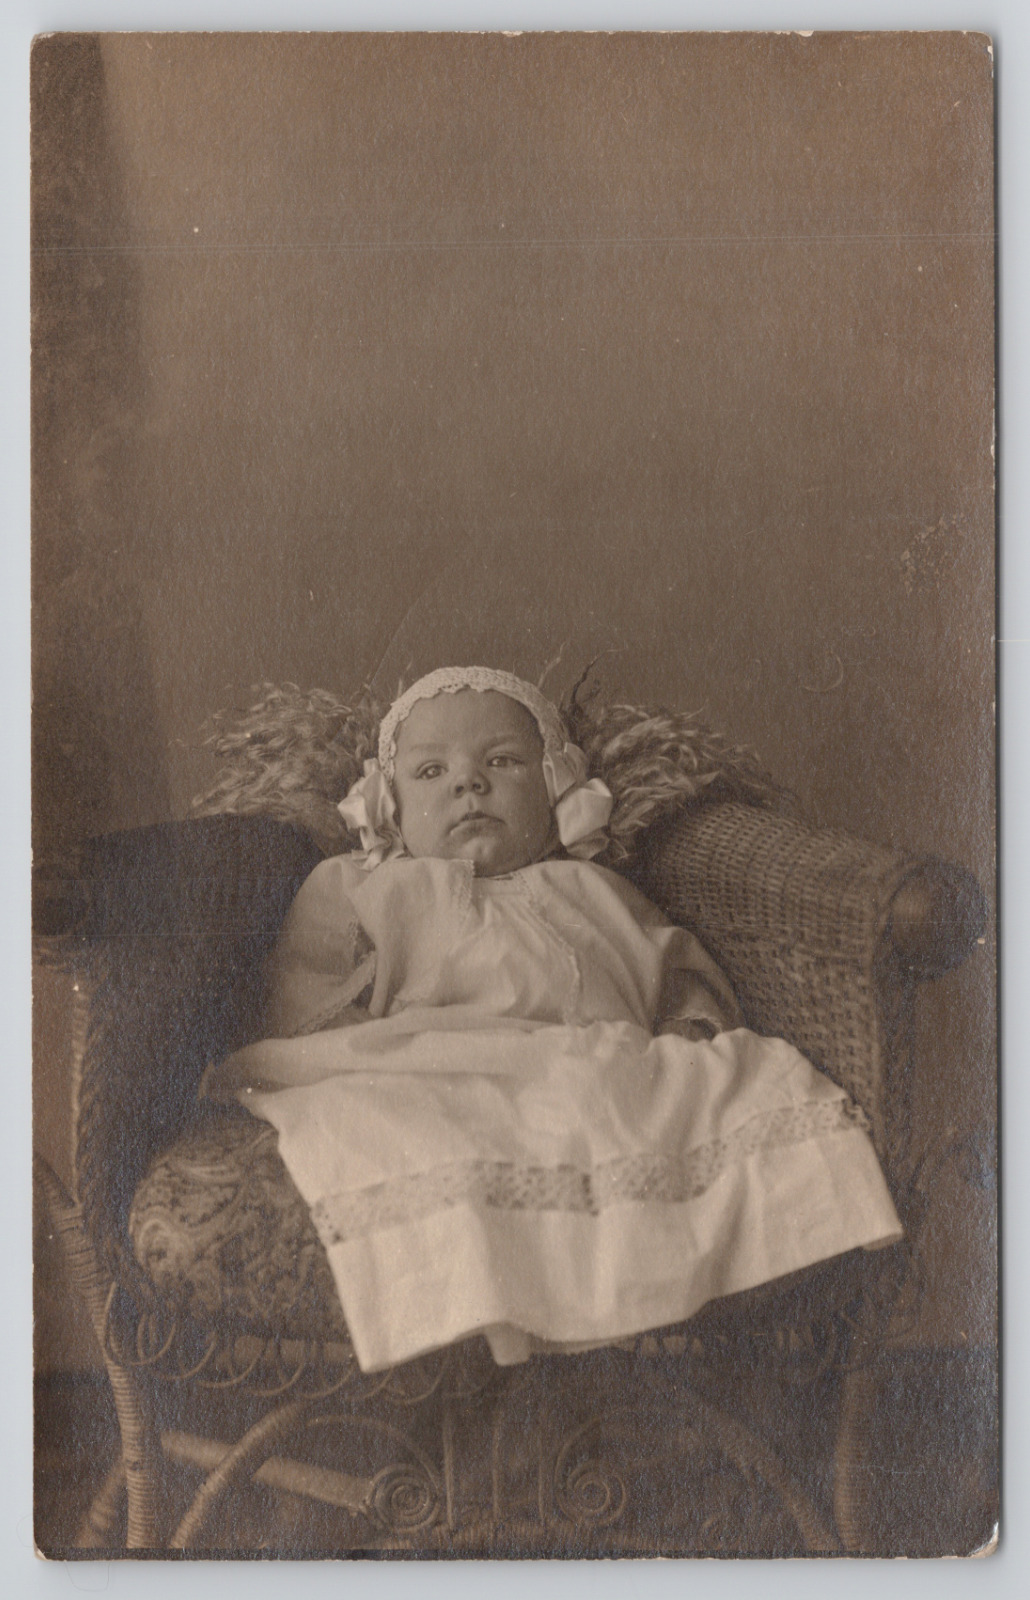 Real Photo Postcard Baby Sitting in Chair in Stuido c1920 RPPC